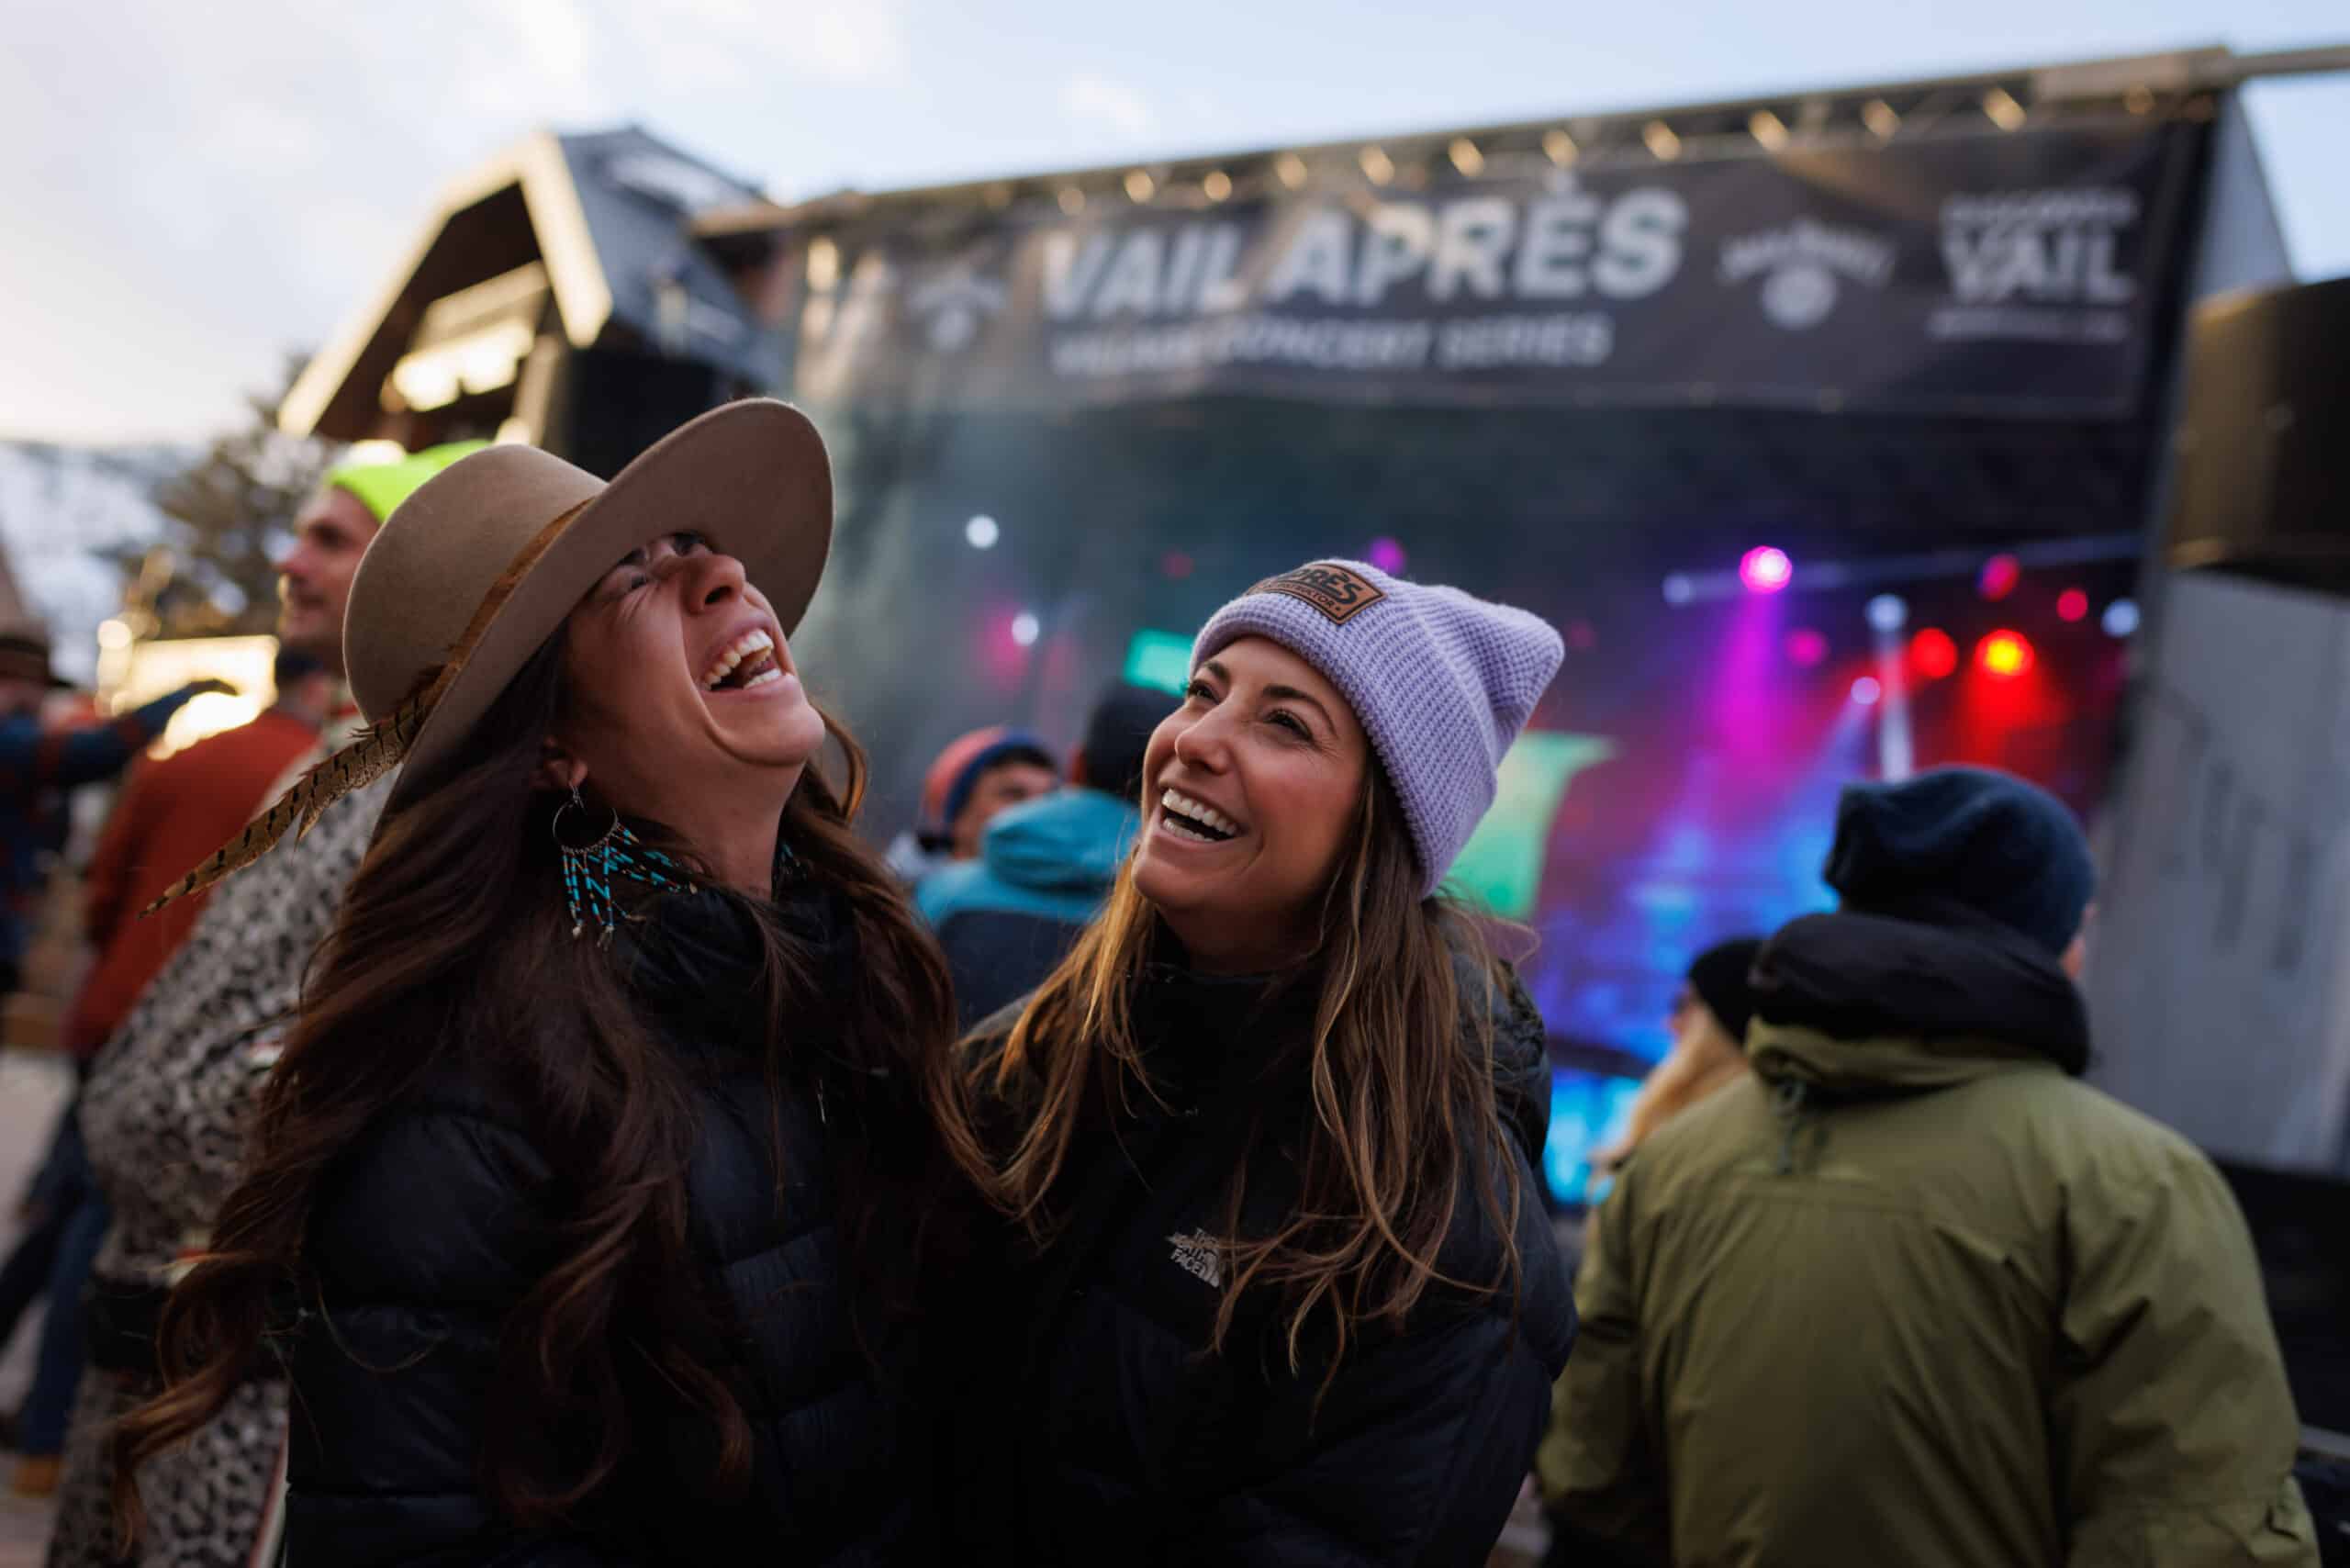 Two girls laughing and dancing at a Vail Apres concert in Vail Village in the winter